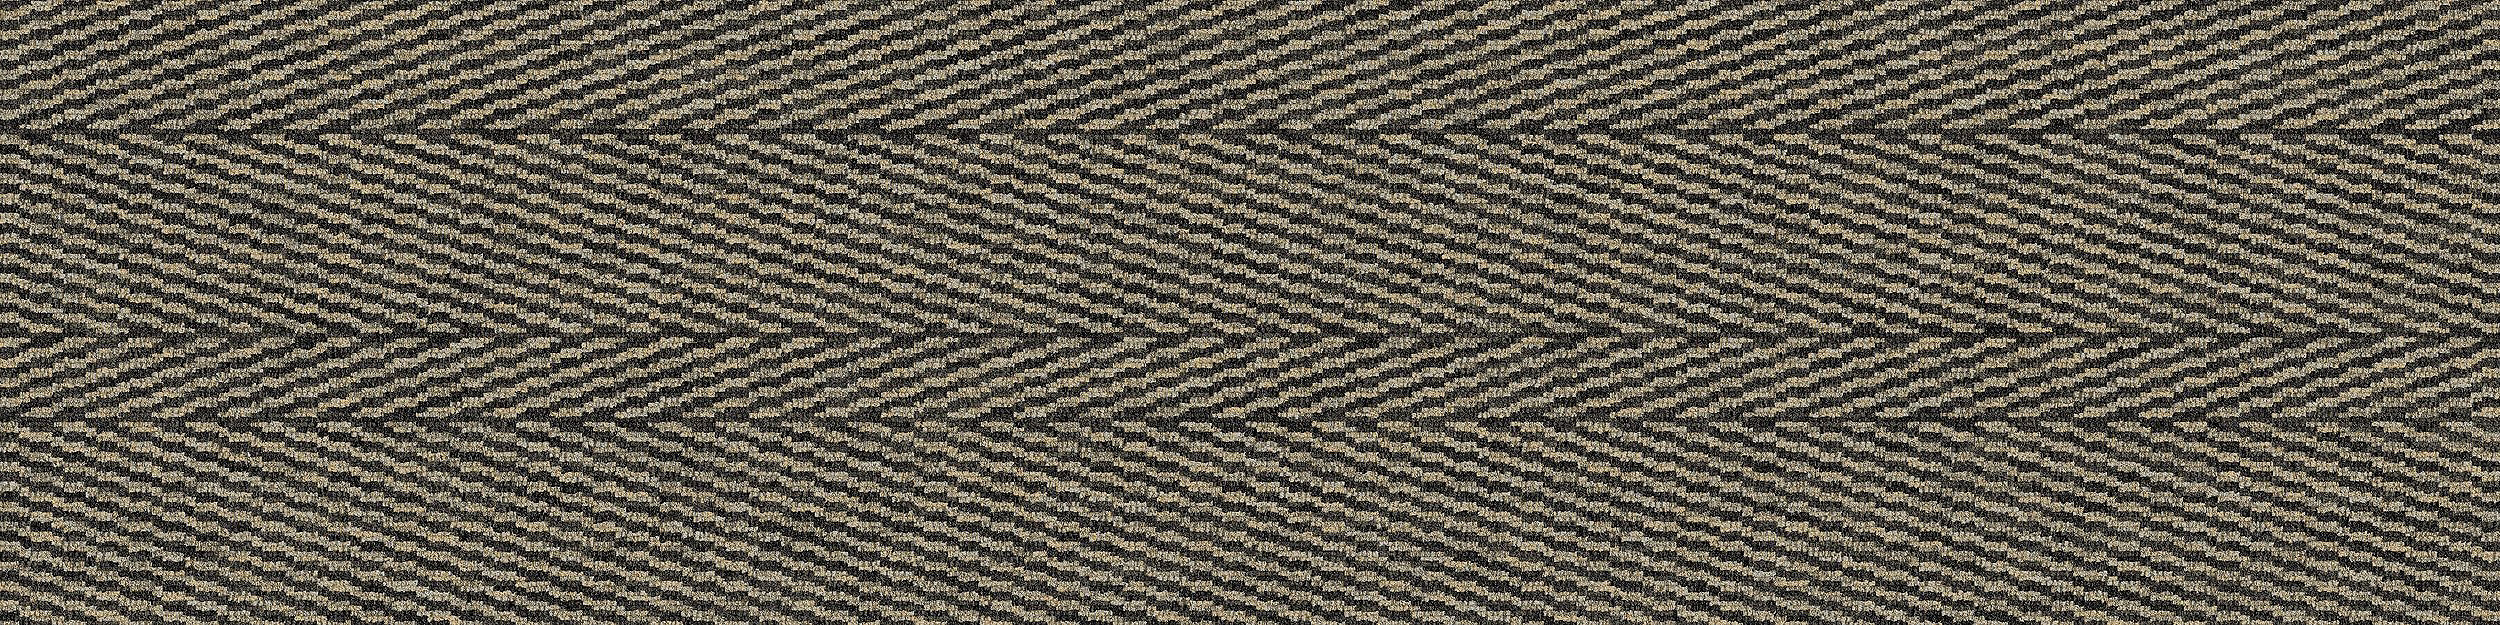 Stitch In Time Carpet Tile In Natural Stitch image number 6